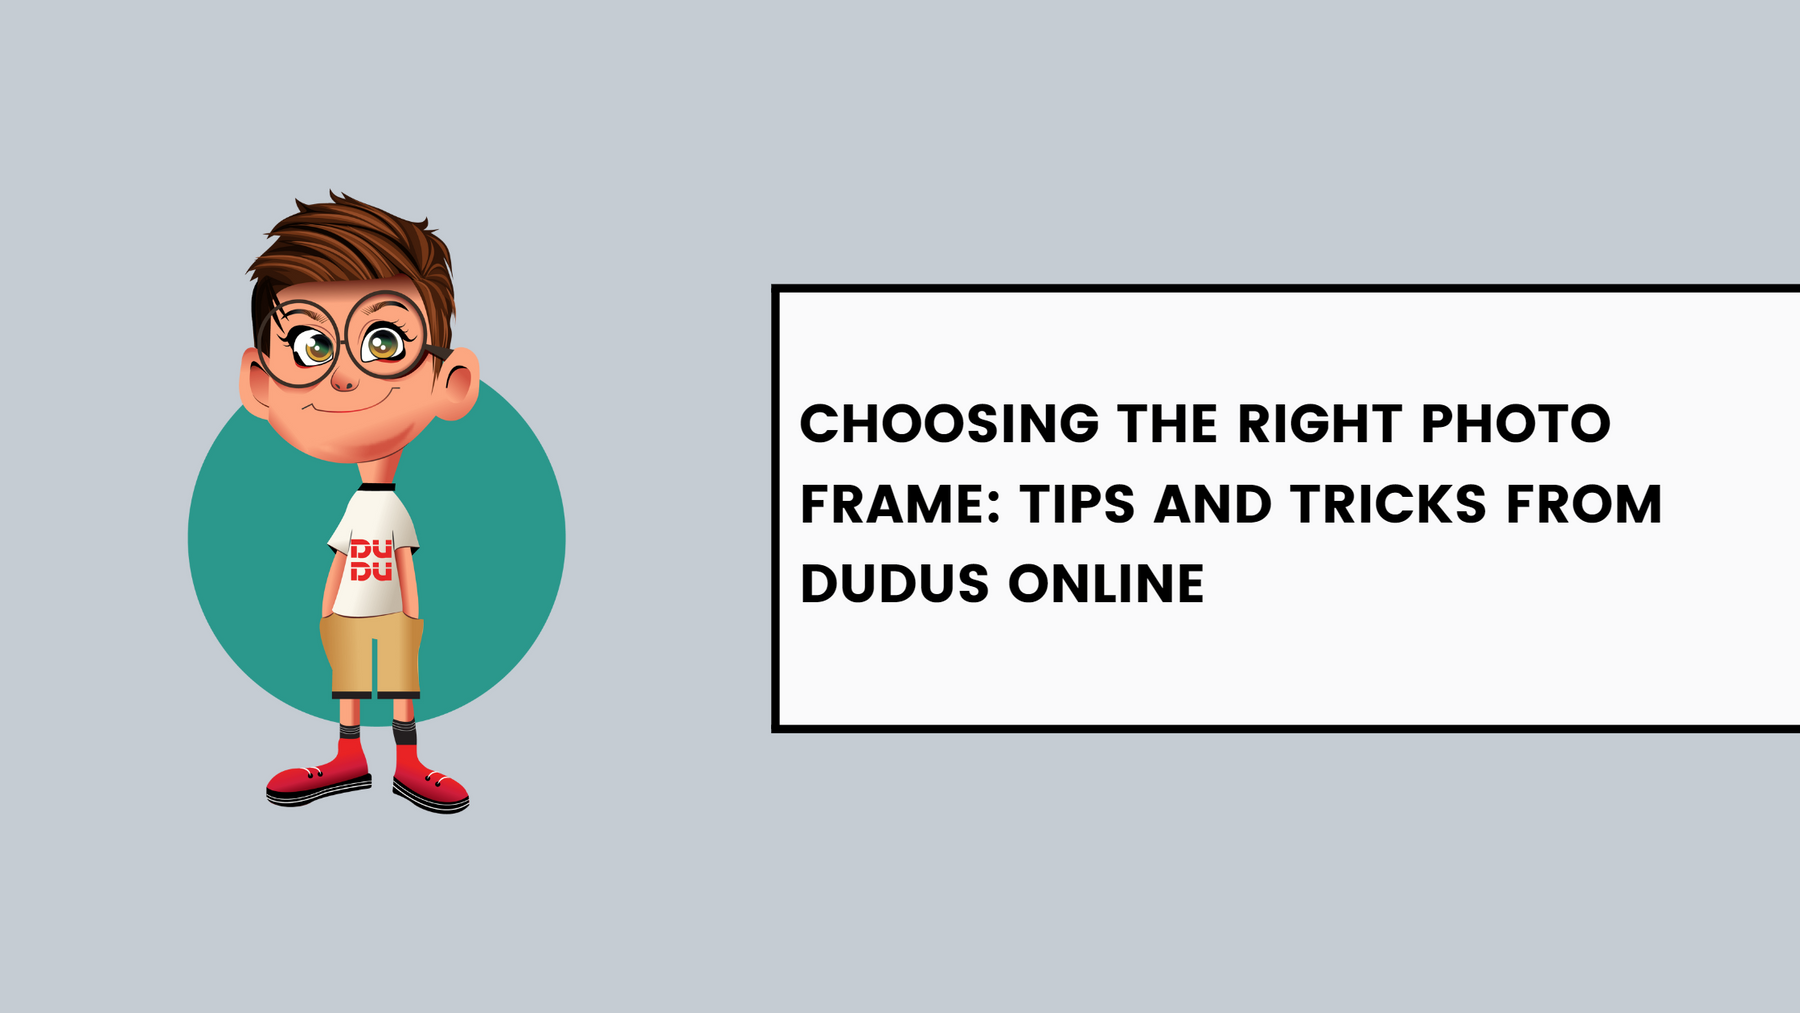 Choosing the Right Photo Frame: Tips and Tricks from Dudus Online